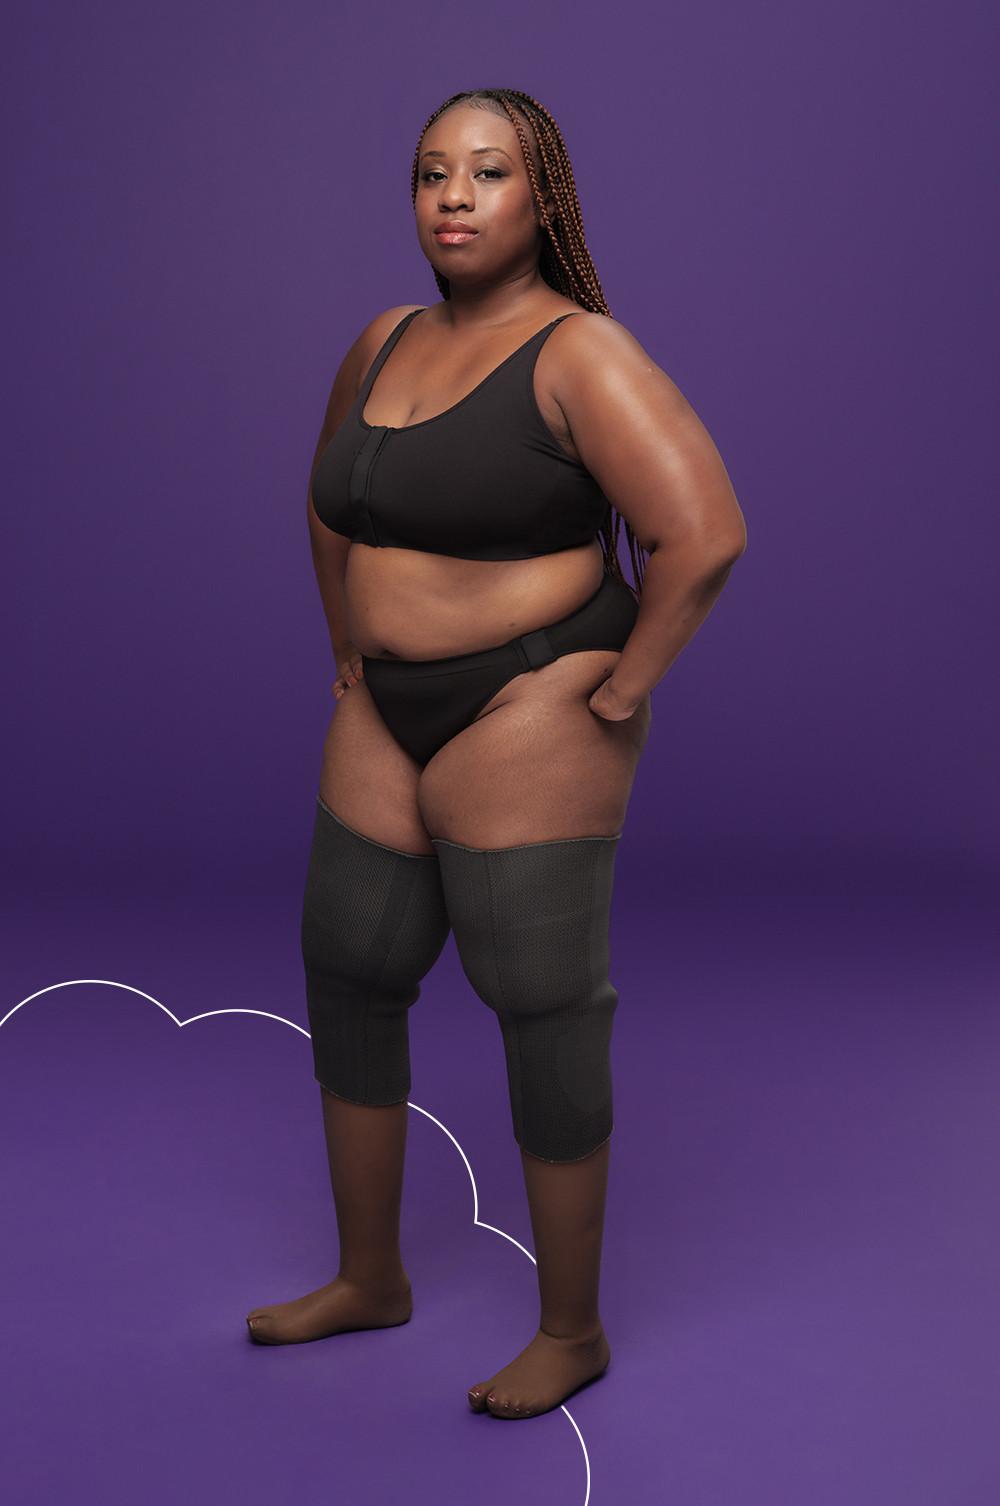 Penneys launches adaptive range for disabled people, with easy-open bras  and briefs : r/ireland